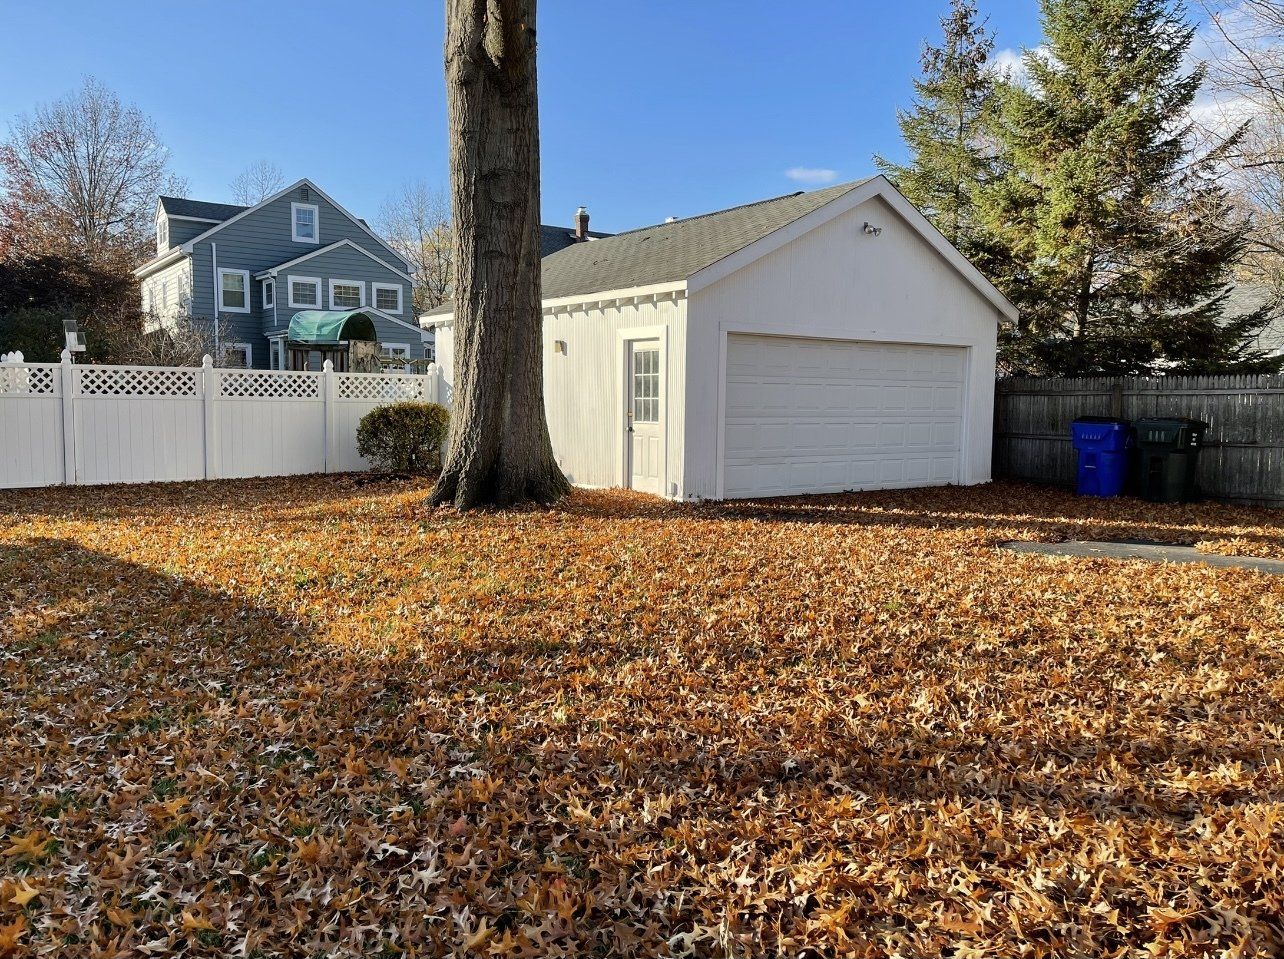 West Hartford backyard covered in leaves from oak tree